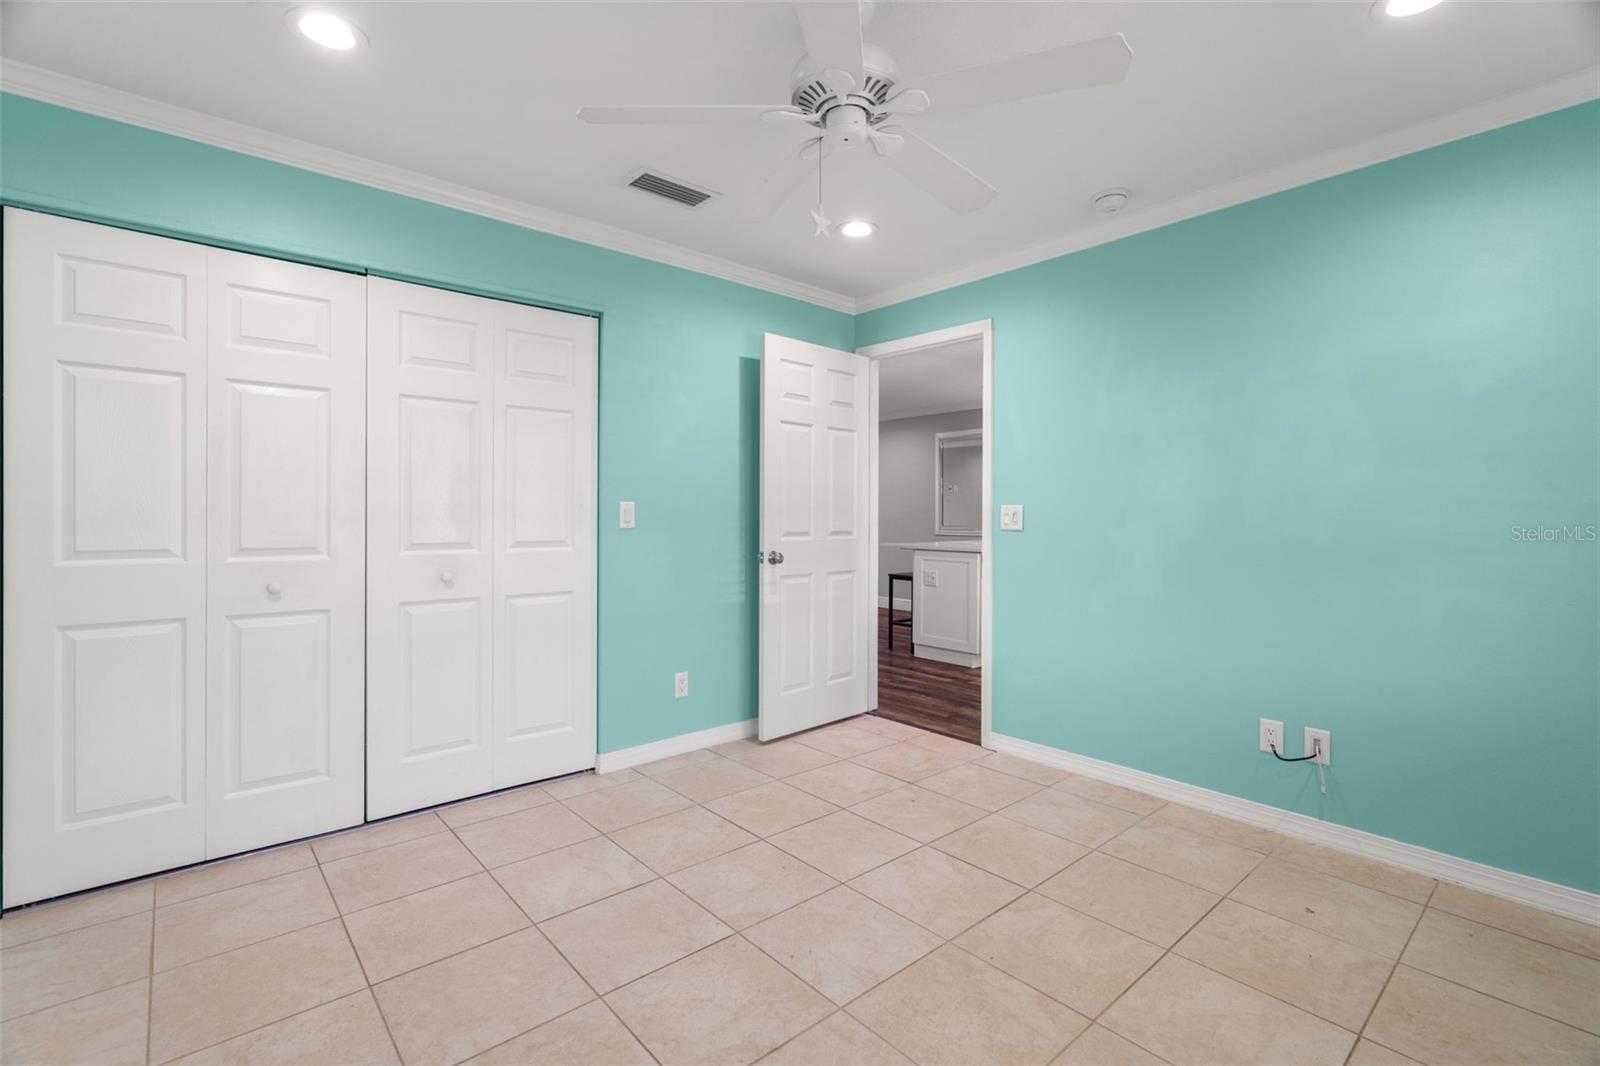 Walk through the small hallway to reach the primary bedroom, which offers generous closet space.